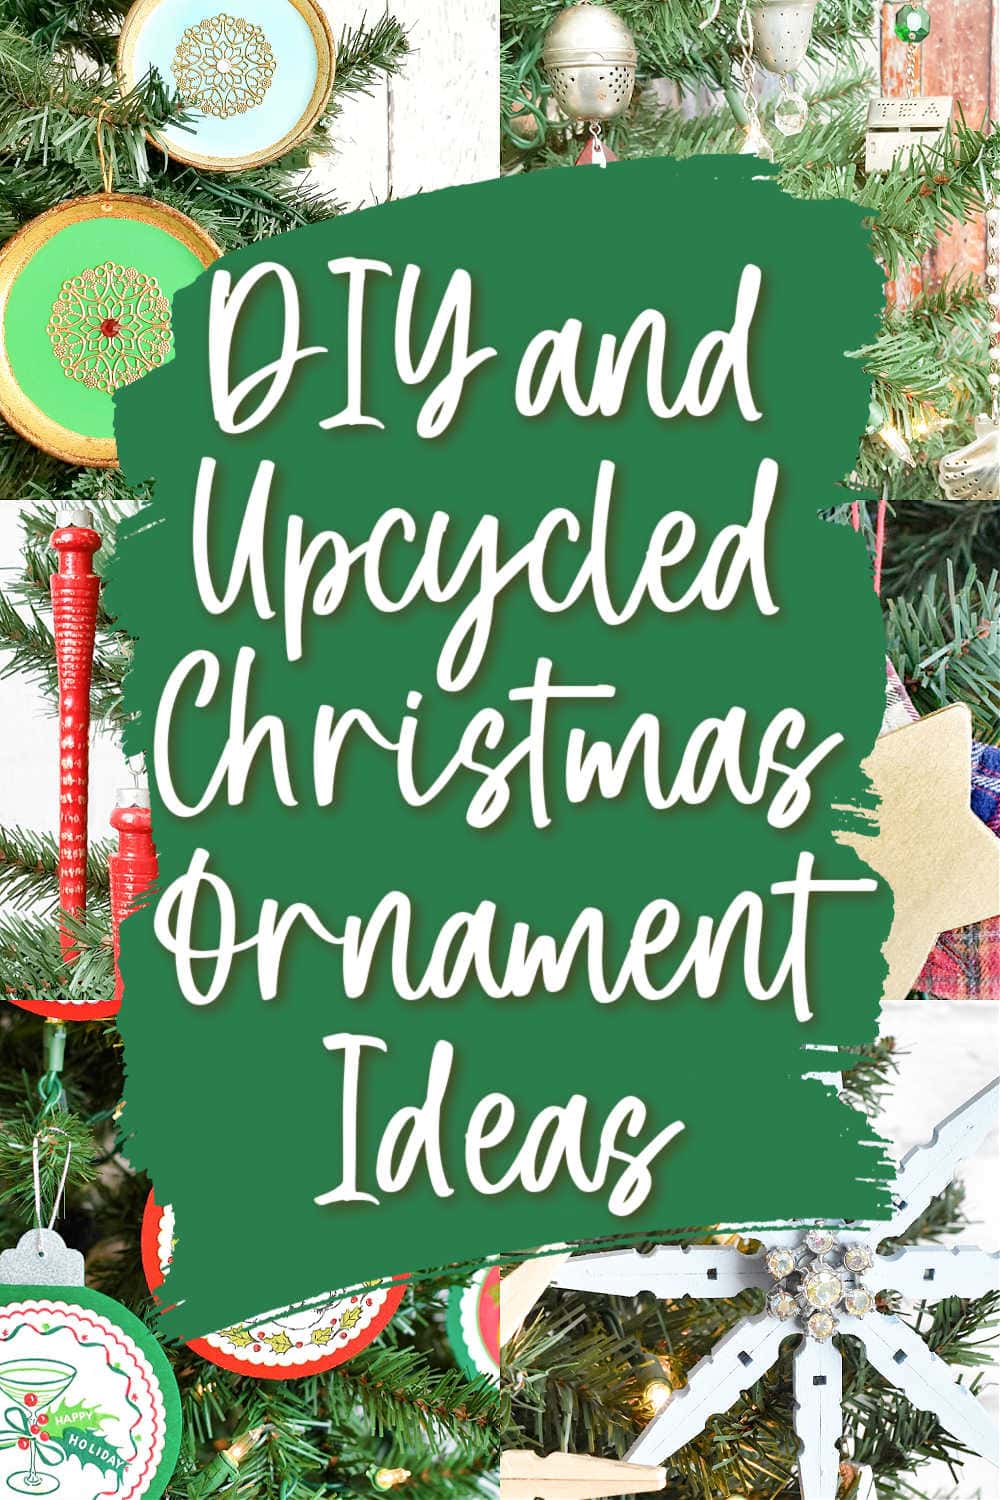 christmas ornament crafts for adults to make some repurposed ornaments